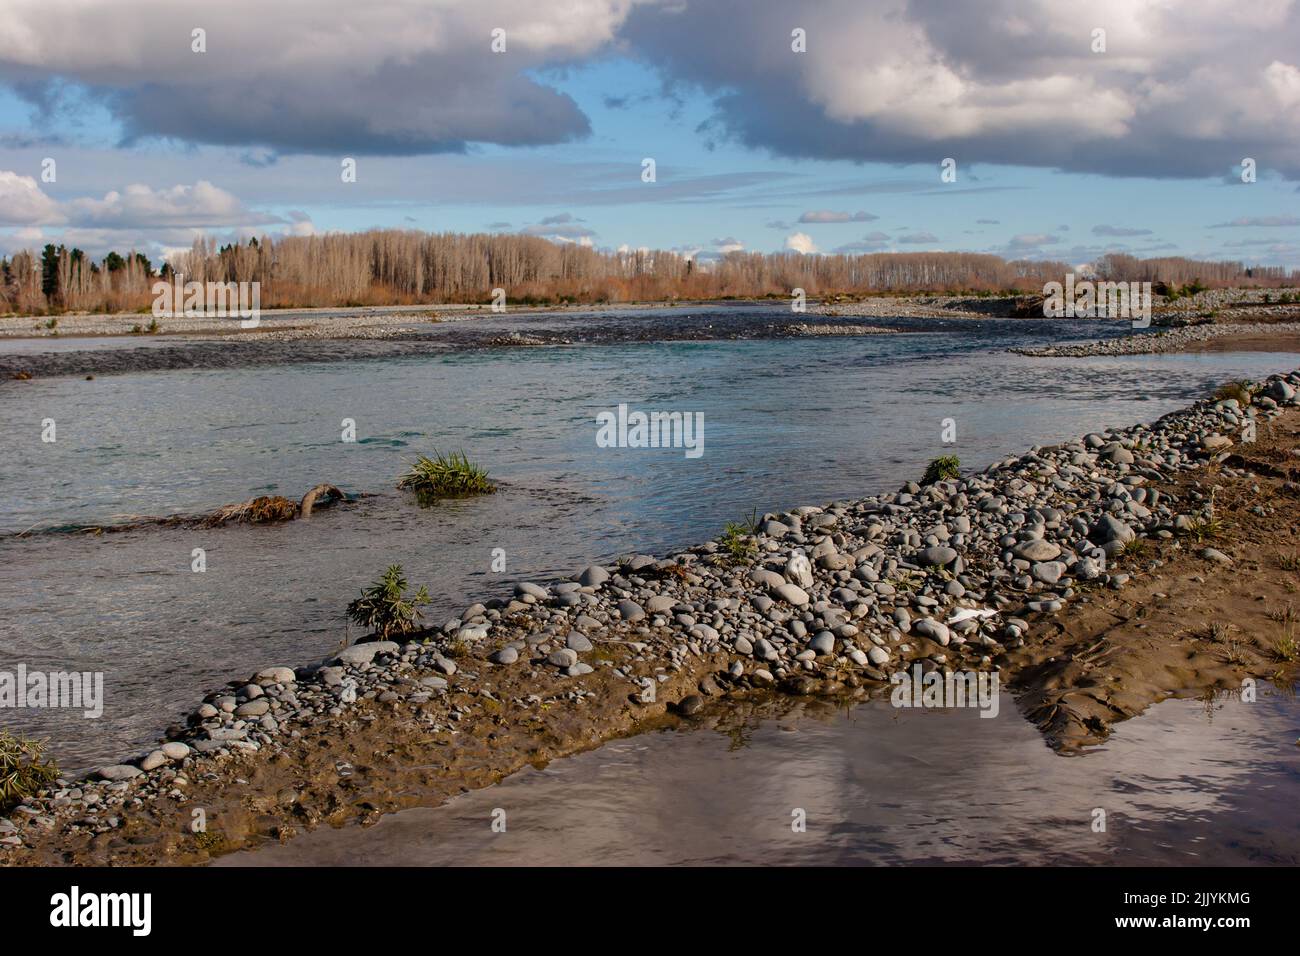 A Look at life in New Zealand: Braided River beds and clear Alpine waters: the Waimakariri River, North Canterbury. Stock Photo